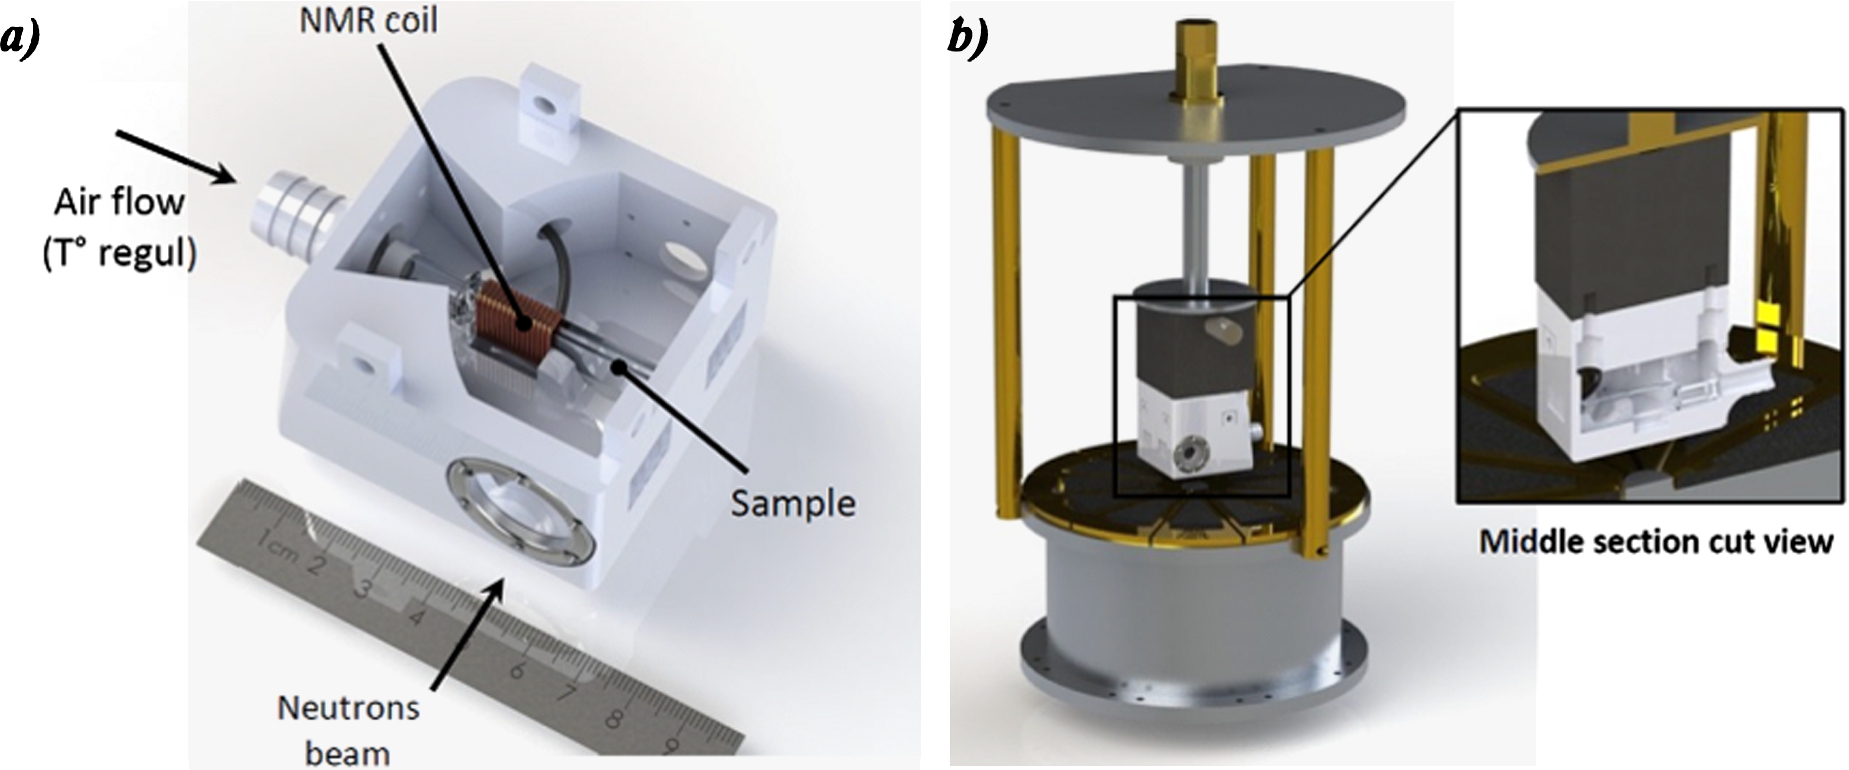 (a) picture of the NMR-neutron probehead (cover not shown). The copper NMR coil tightly surrounds a part of the Hellma® sample cell at immediate proximity of the neutron beam section. (b) 3D view of the probehead adaptation onto the NMR spectrometer. Here, the NMR-neutron probehead cover necessary to control the heated air stream used for the sample temperature regulation is shown.